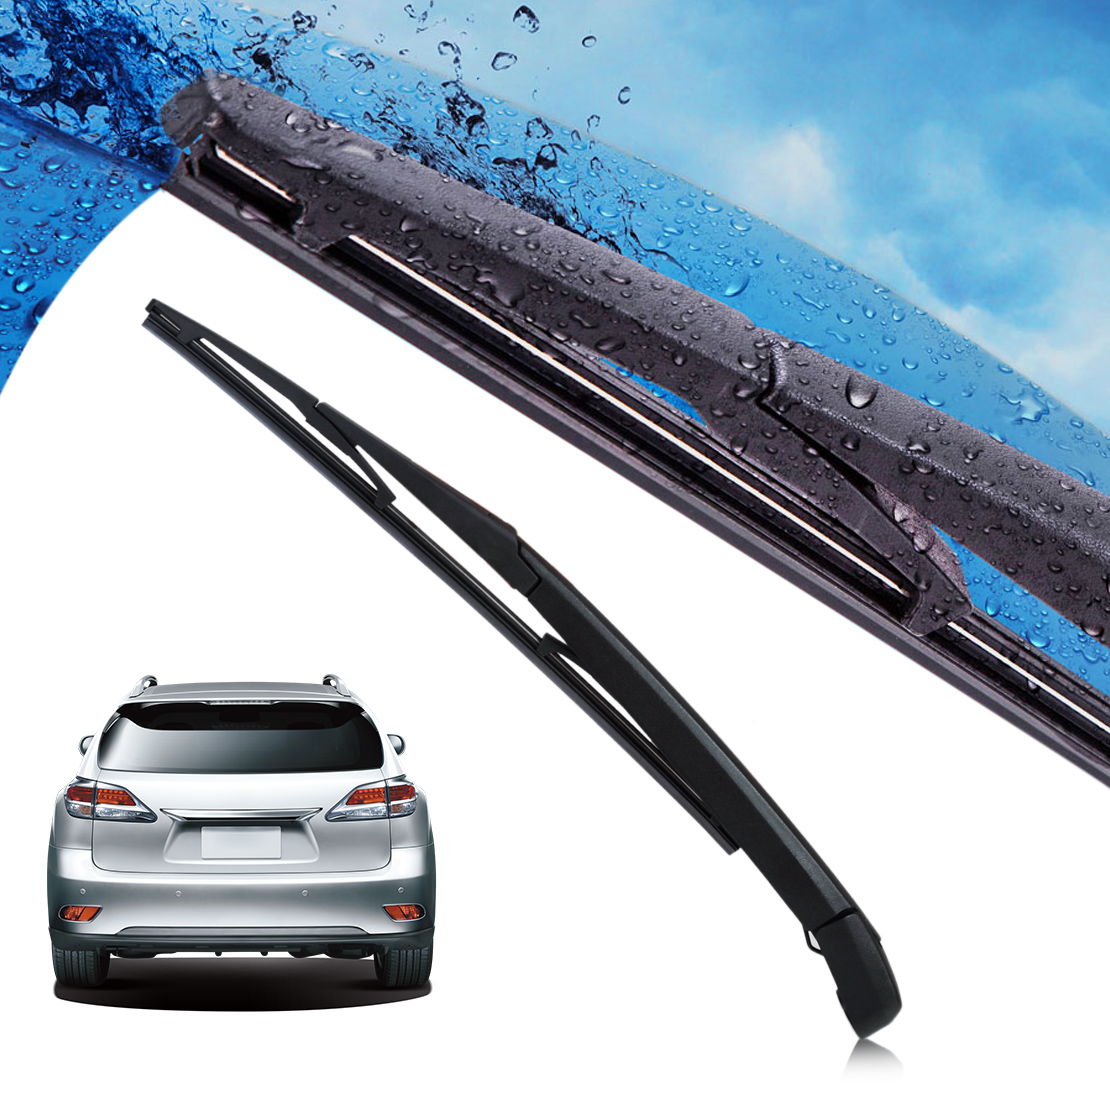 New Replace Rear Windshield Wiper Arm & Blade For LEXUS RX300 RX330 RX350 RX400h | eBay Windshield Wipers For 2008 Lexus Rx 350